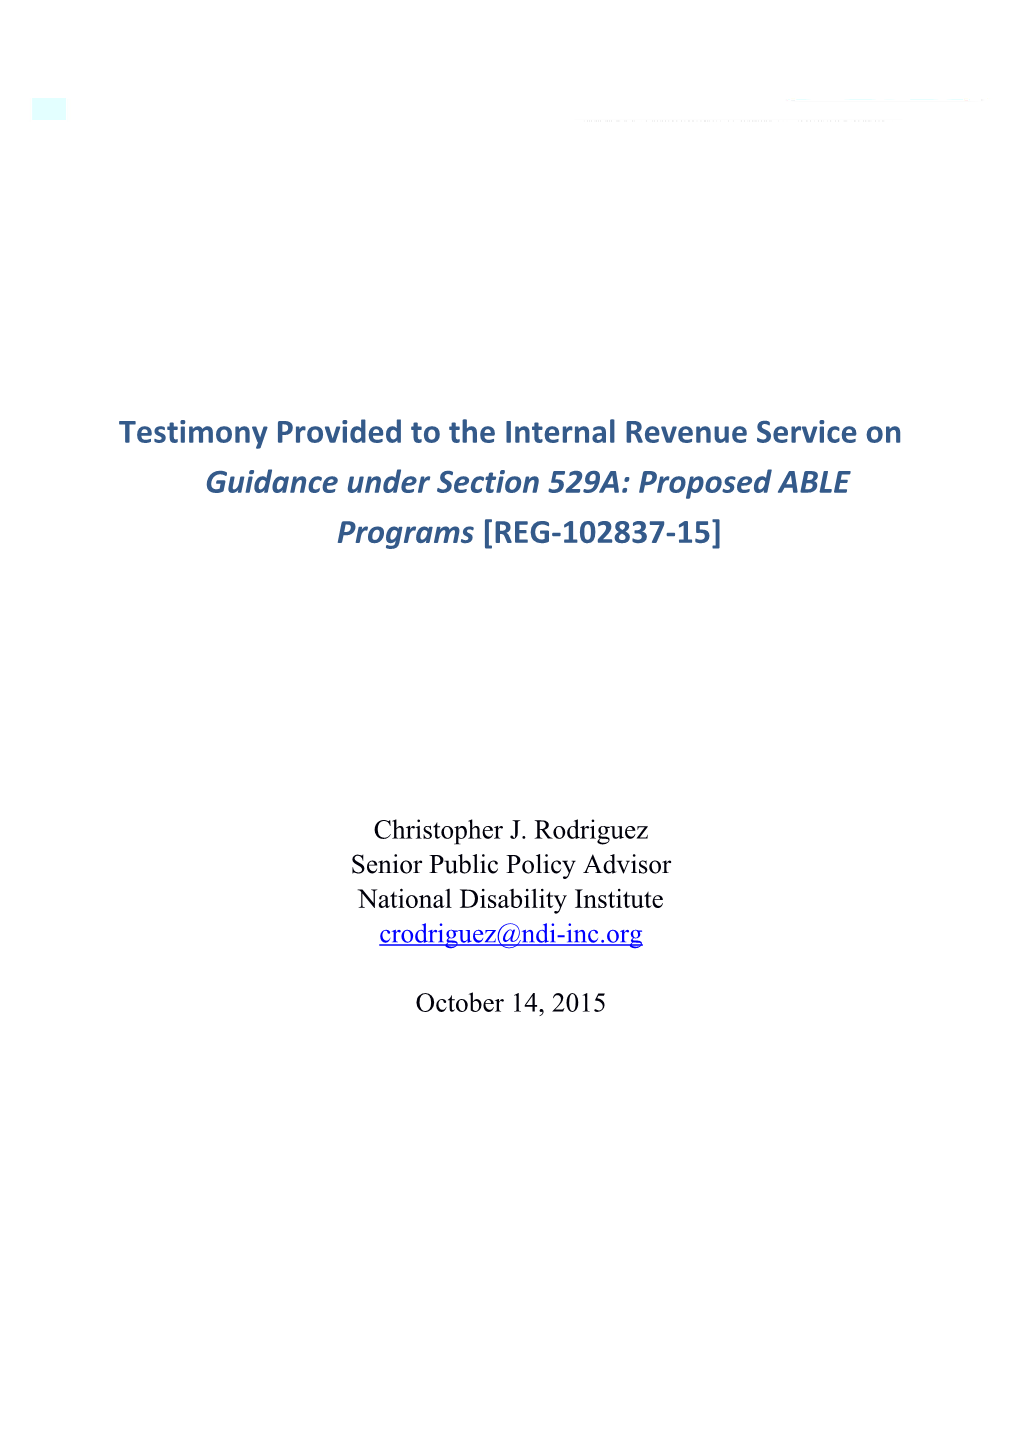 Testimony Provided to the Internal Revenue Service on Guidance Under Section 529A: Proposed